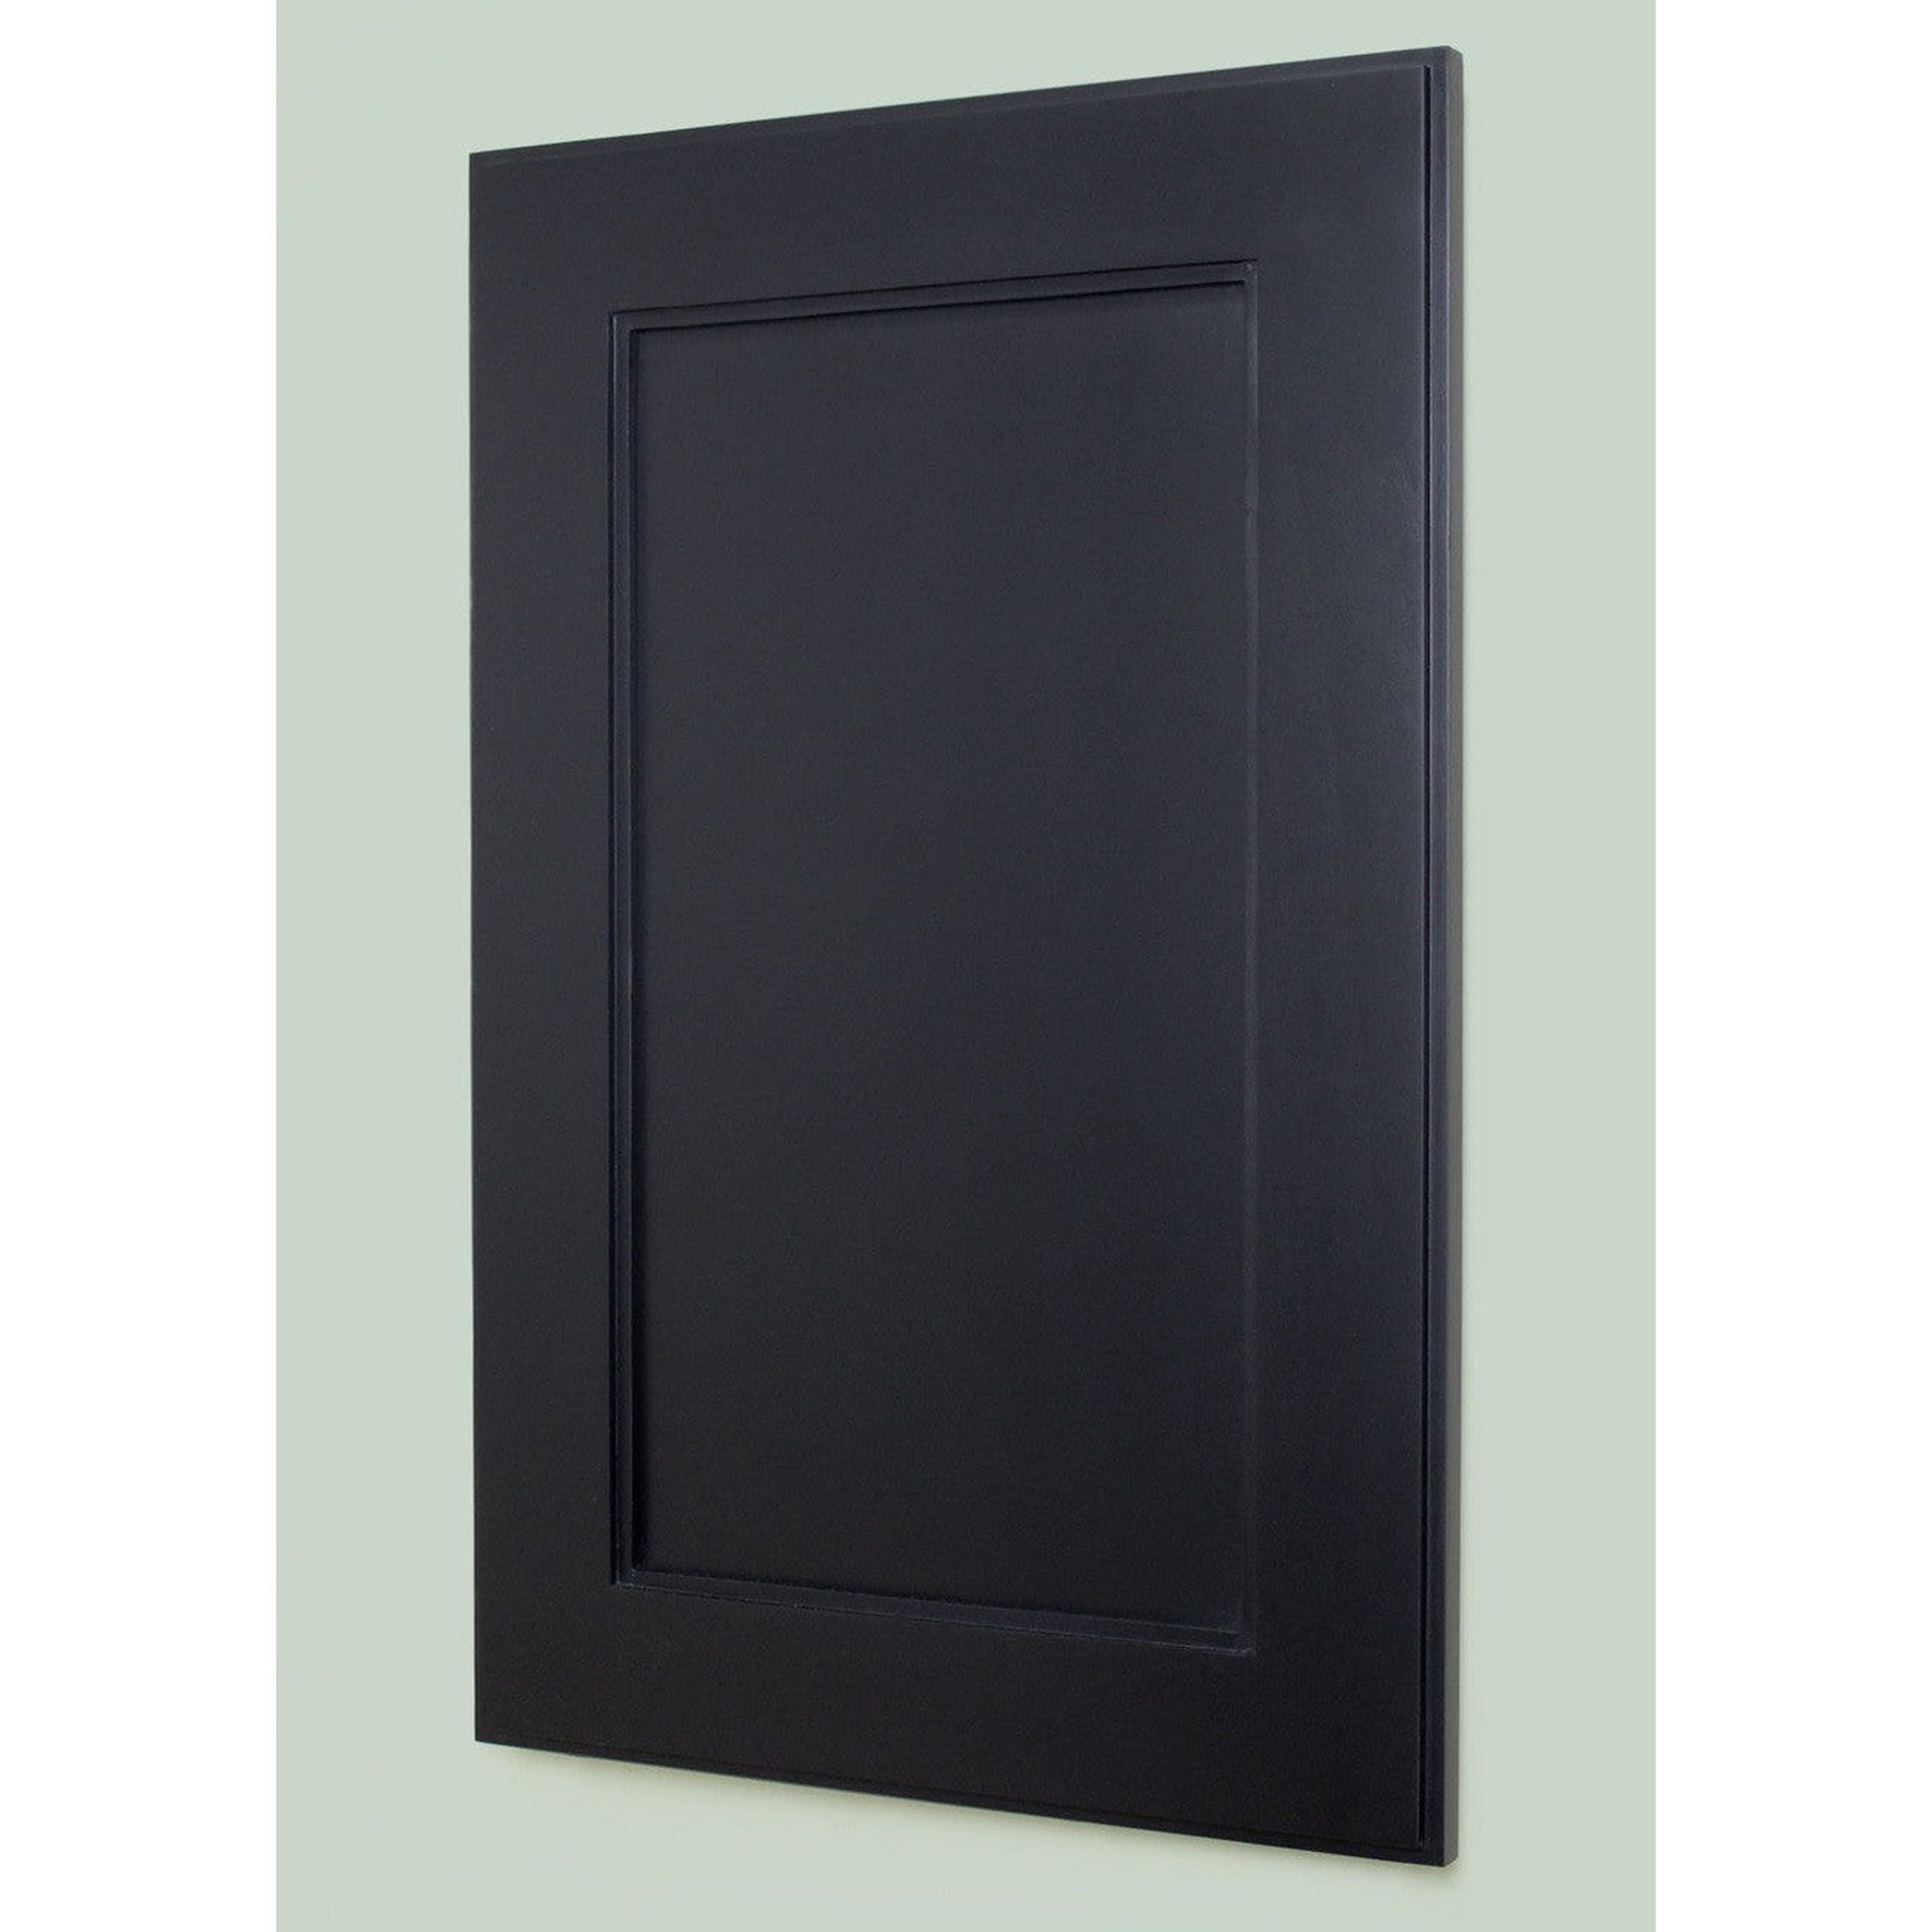 Fox Hollow Furnishings 14" x 24" Black Shaker Style White Interior Standard 4" Depth Recessed Medicine Cabinet With Mirror